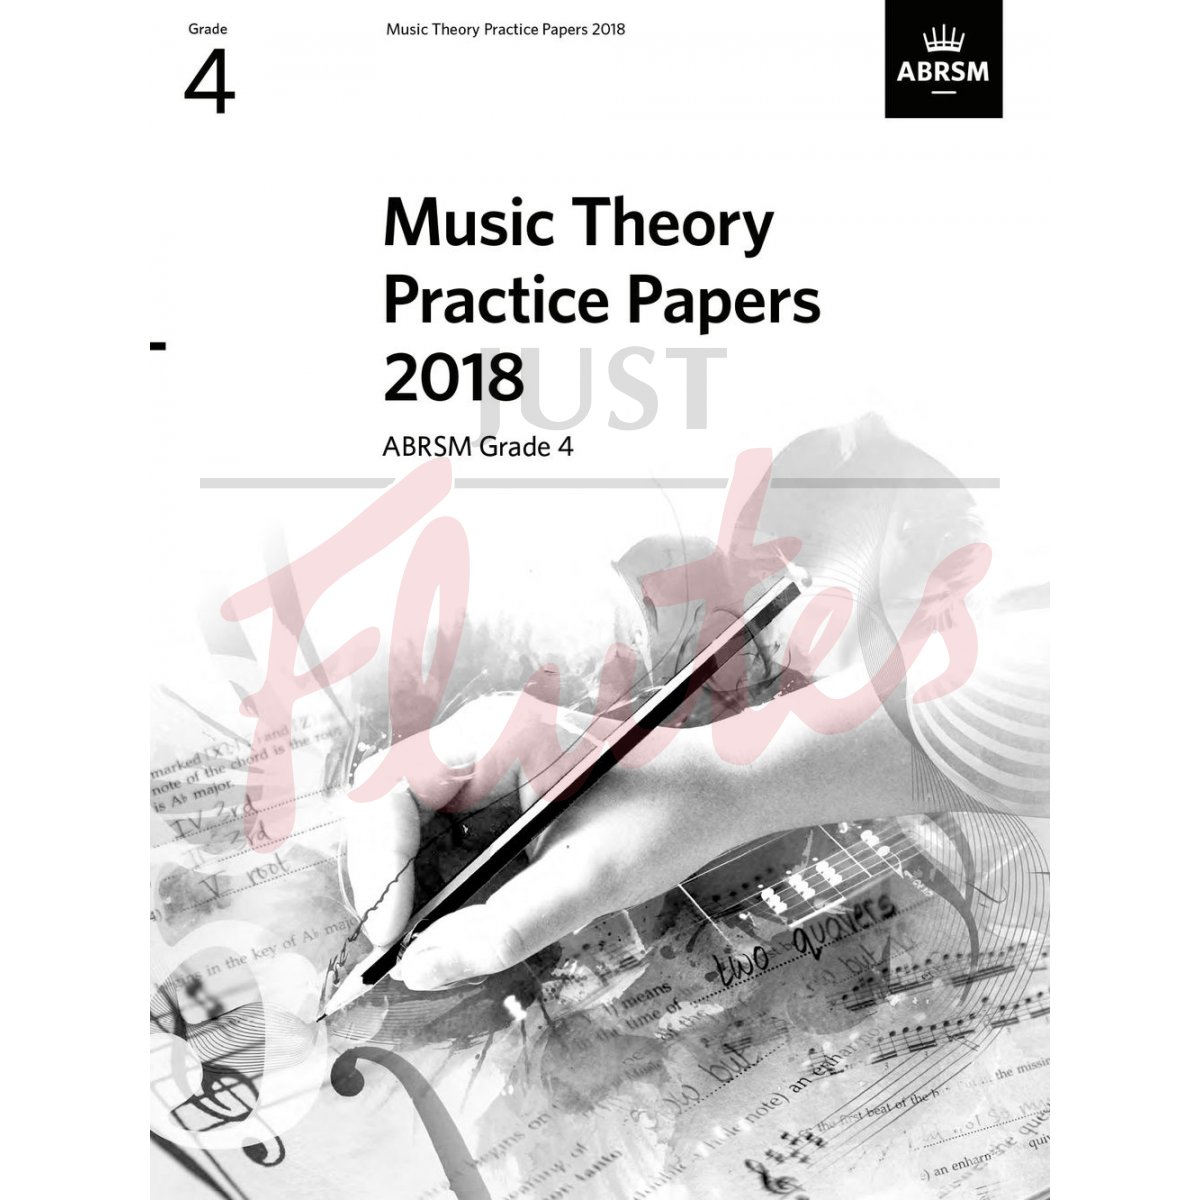 Music Theory Practice Papers 2018 Grade 4